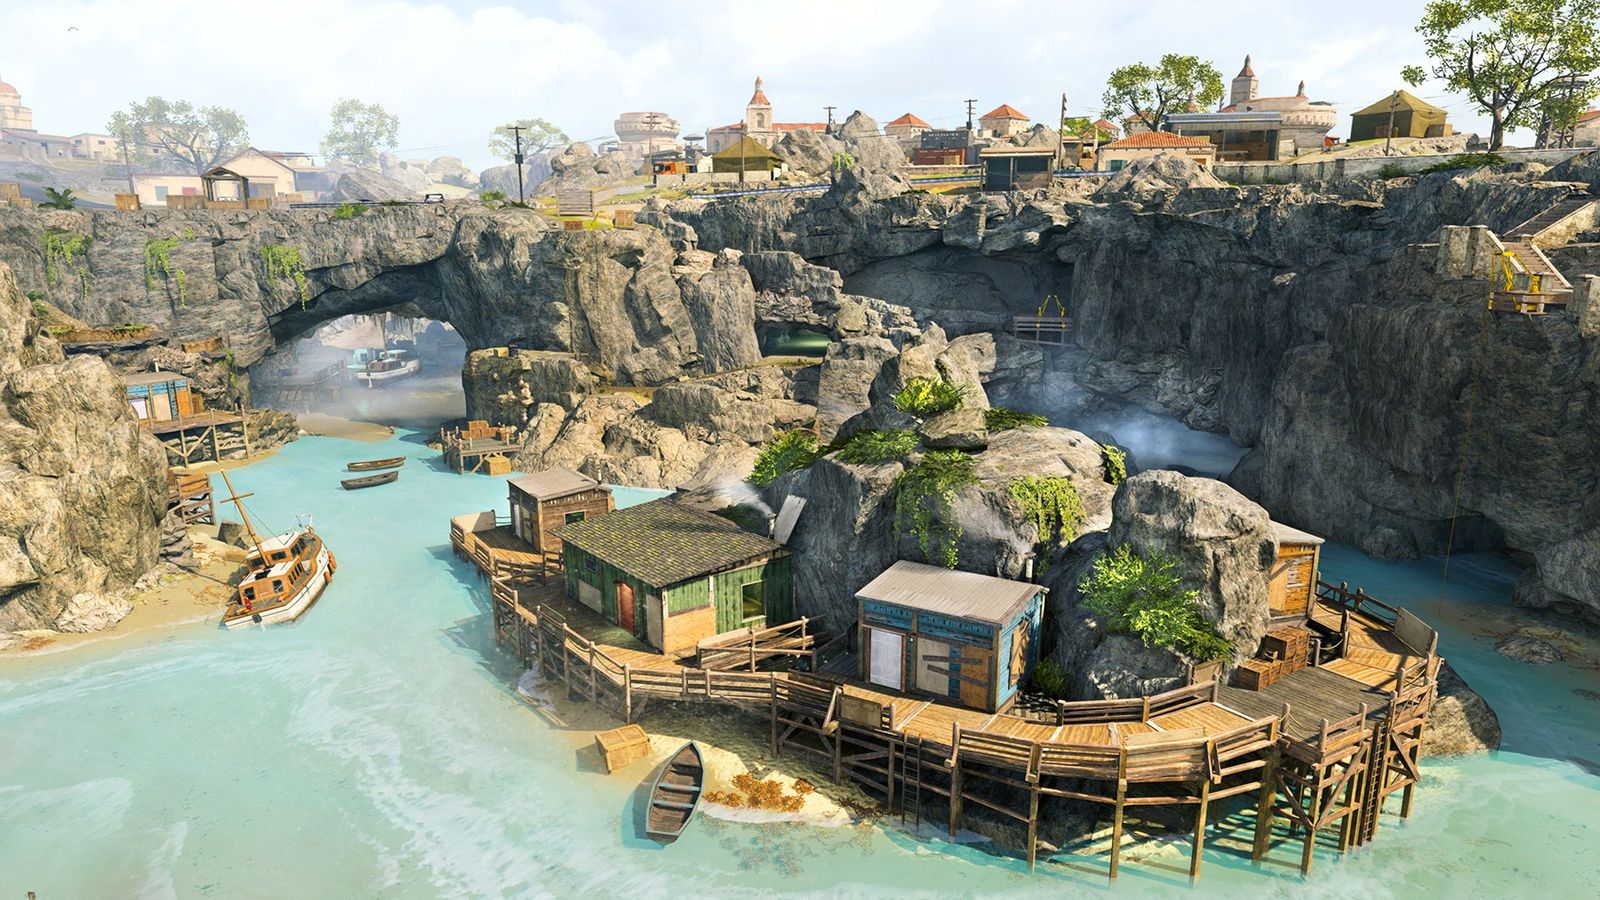 Image of Fortune's Keep in Call of Duty: Warzone.